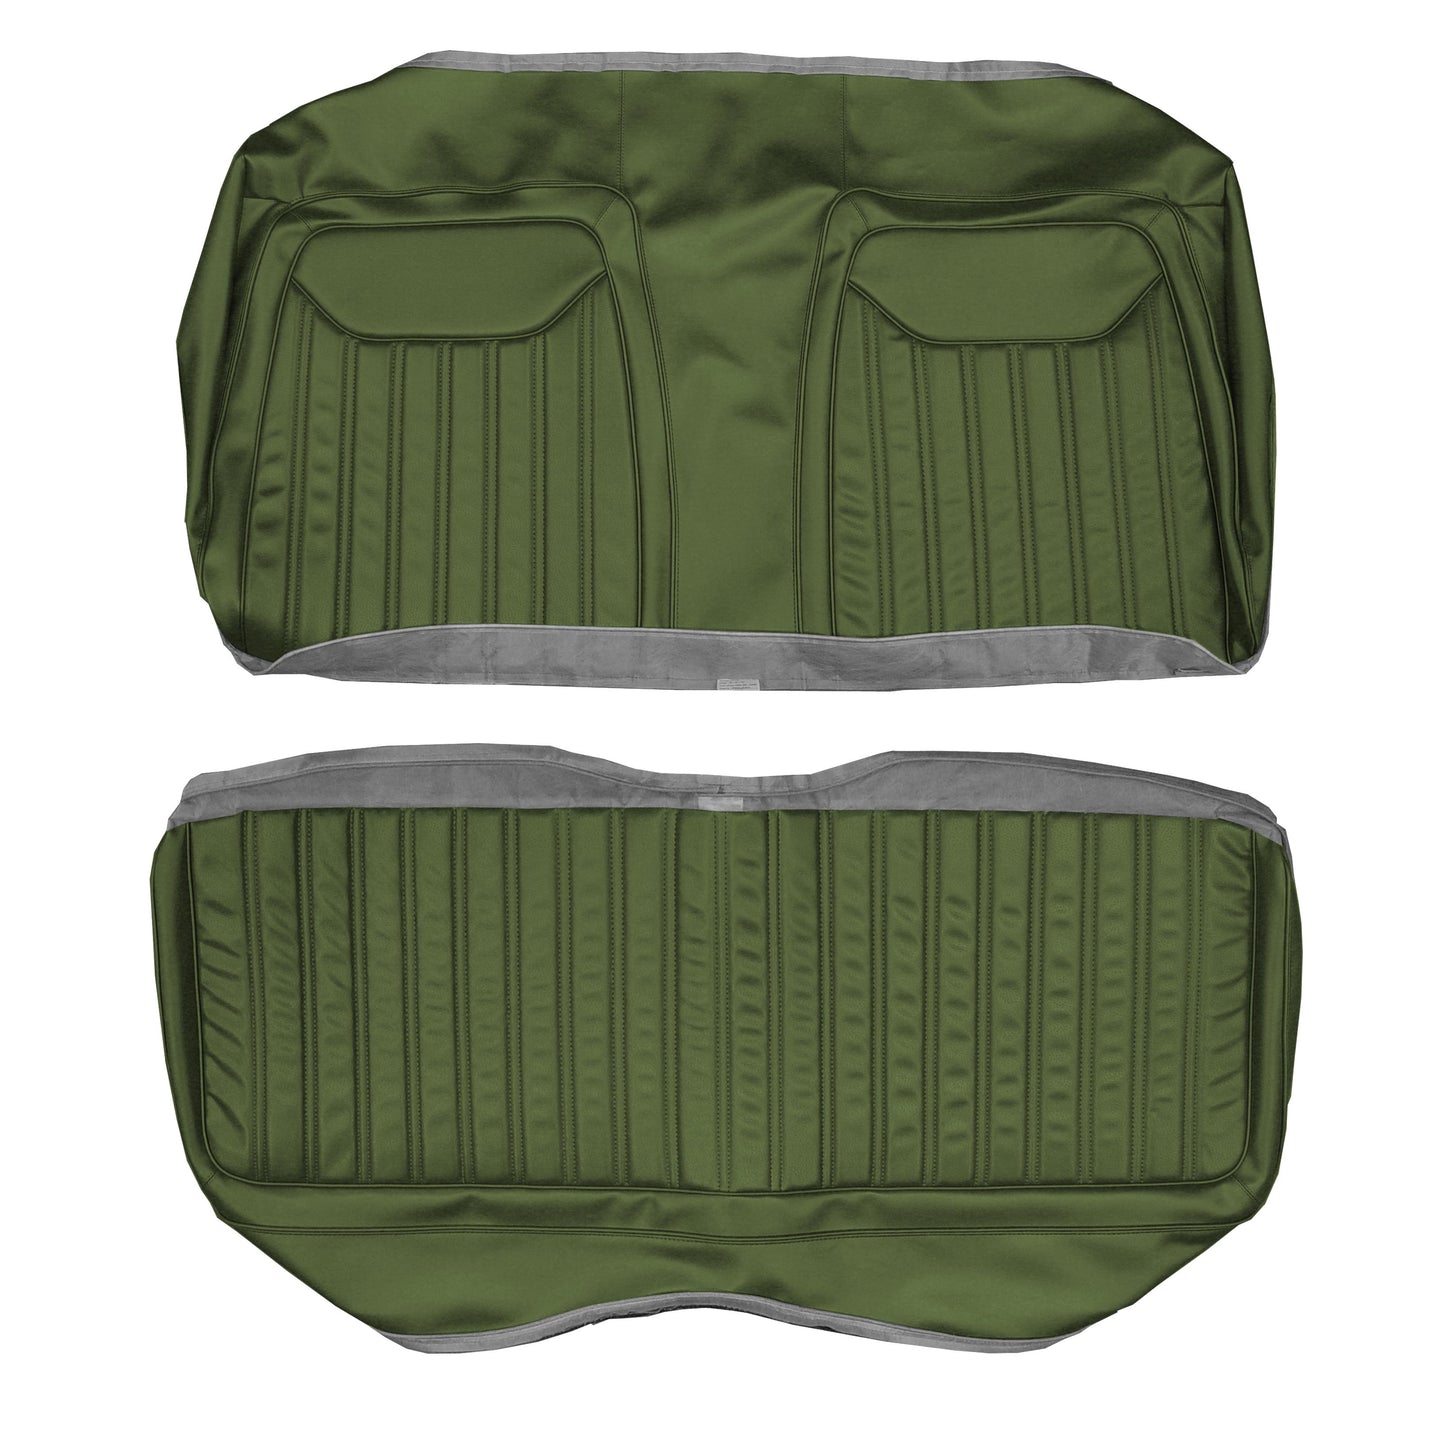 71 CHARGER/SUPERBEE "DELUXE" REAR UPHOLSTERY - GREEN